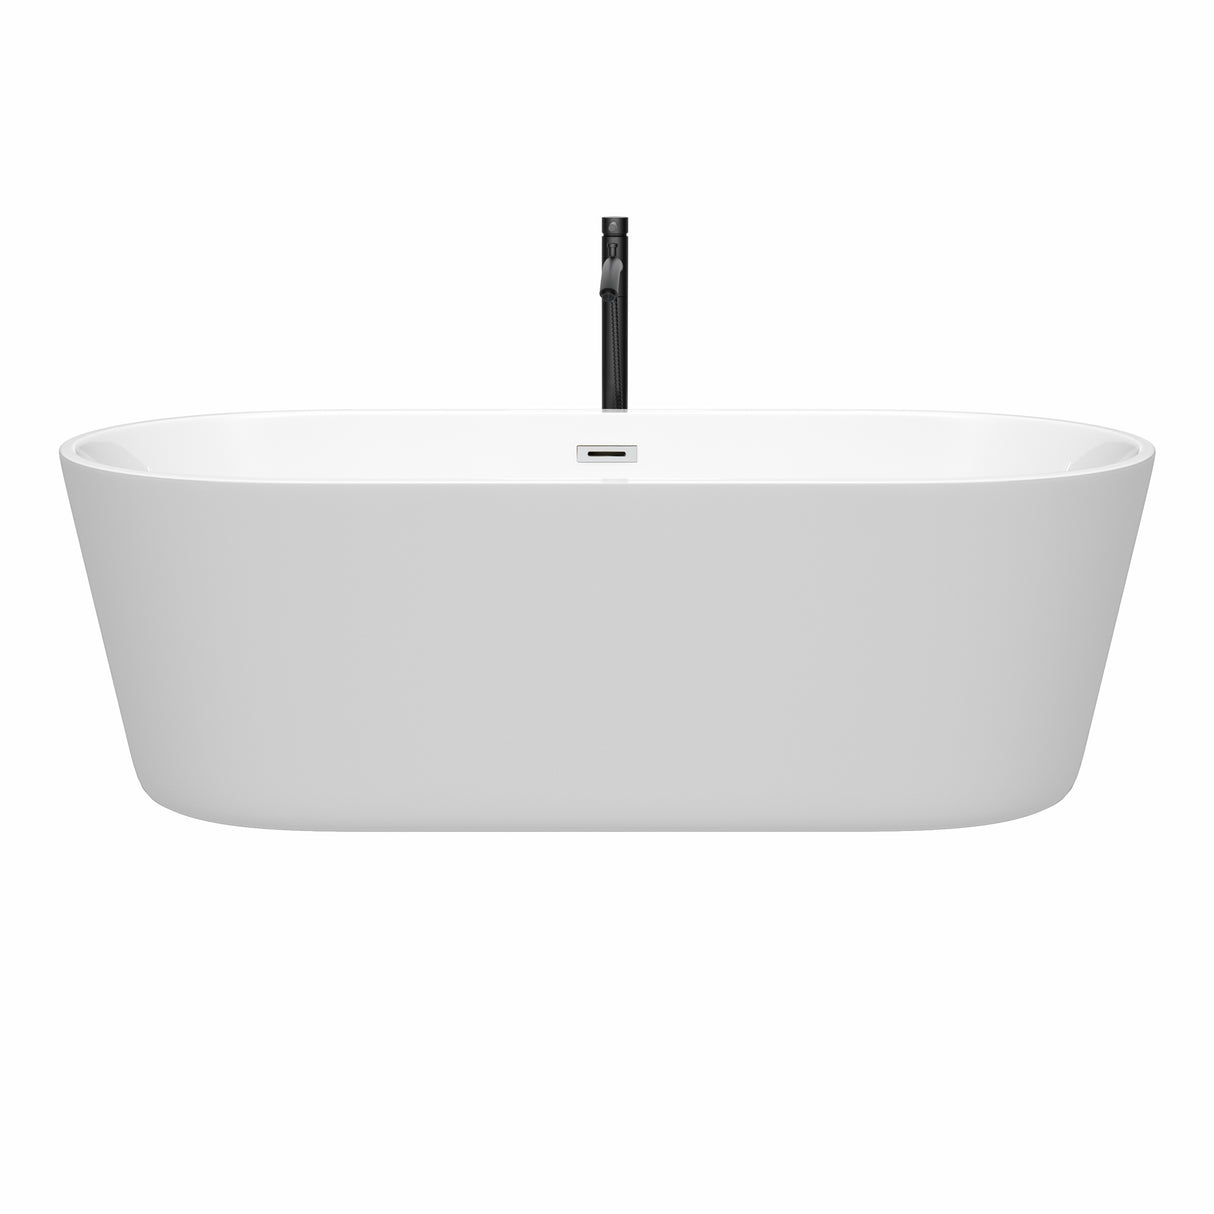 Carissa 71 Inch Freestanding Bathtub in White with Polished Chrome Trim and Floor Mounted Faucet in Matte Black